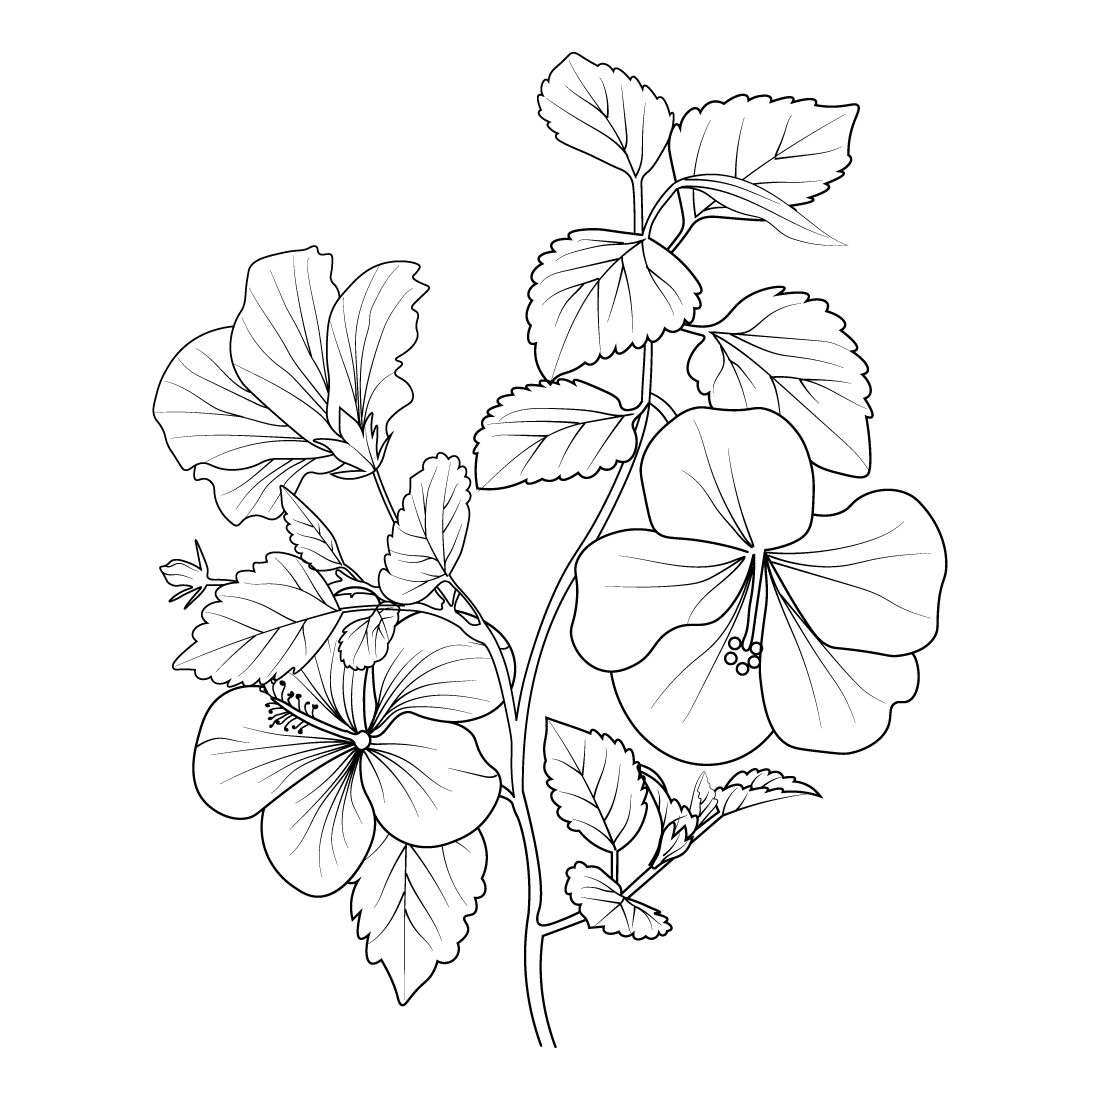 Flower coloring page and books hand